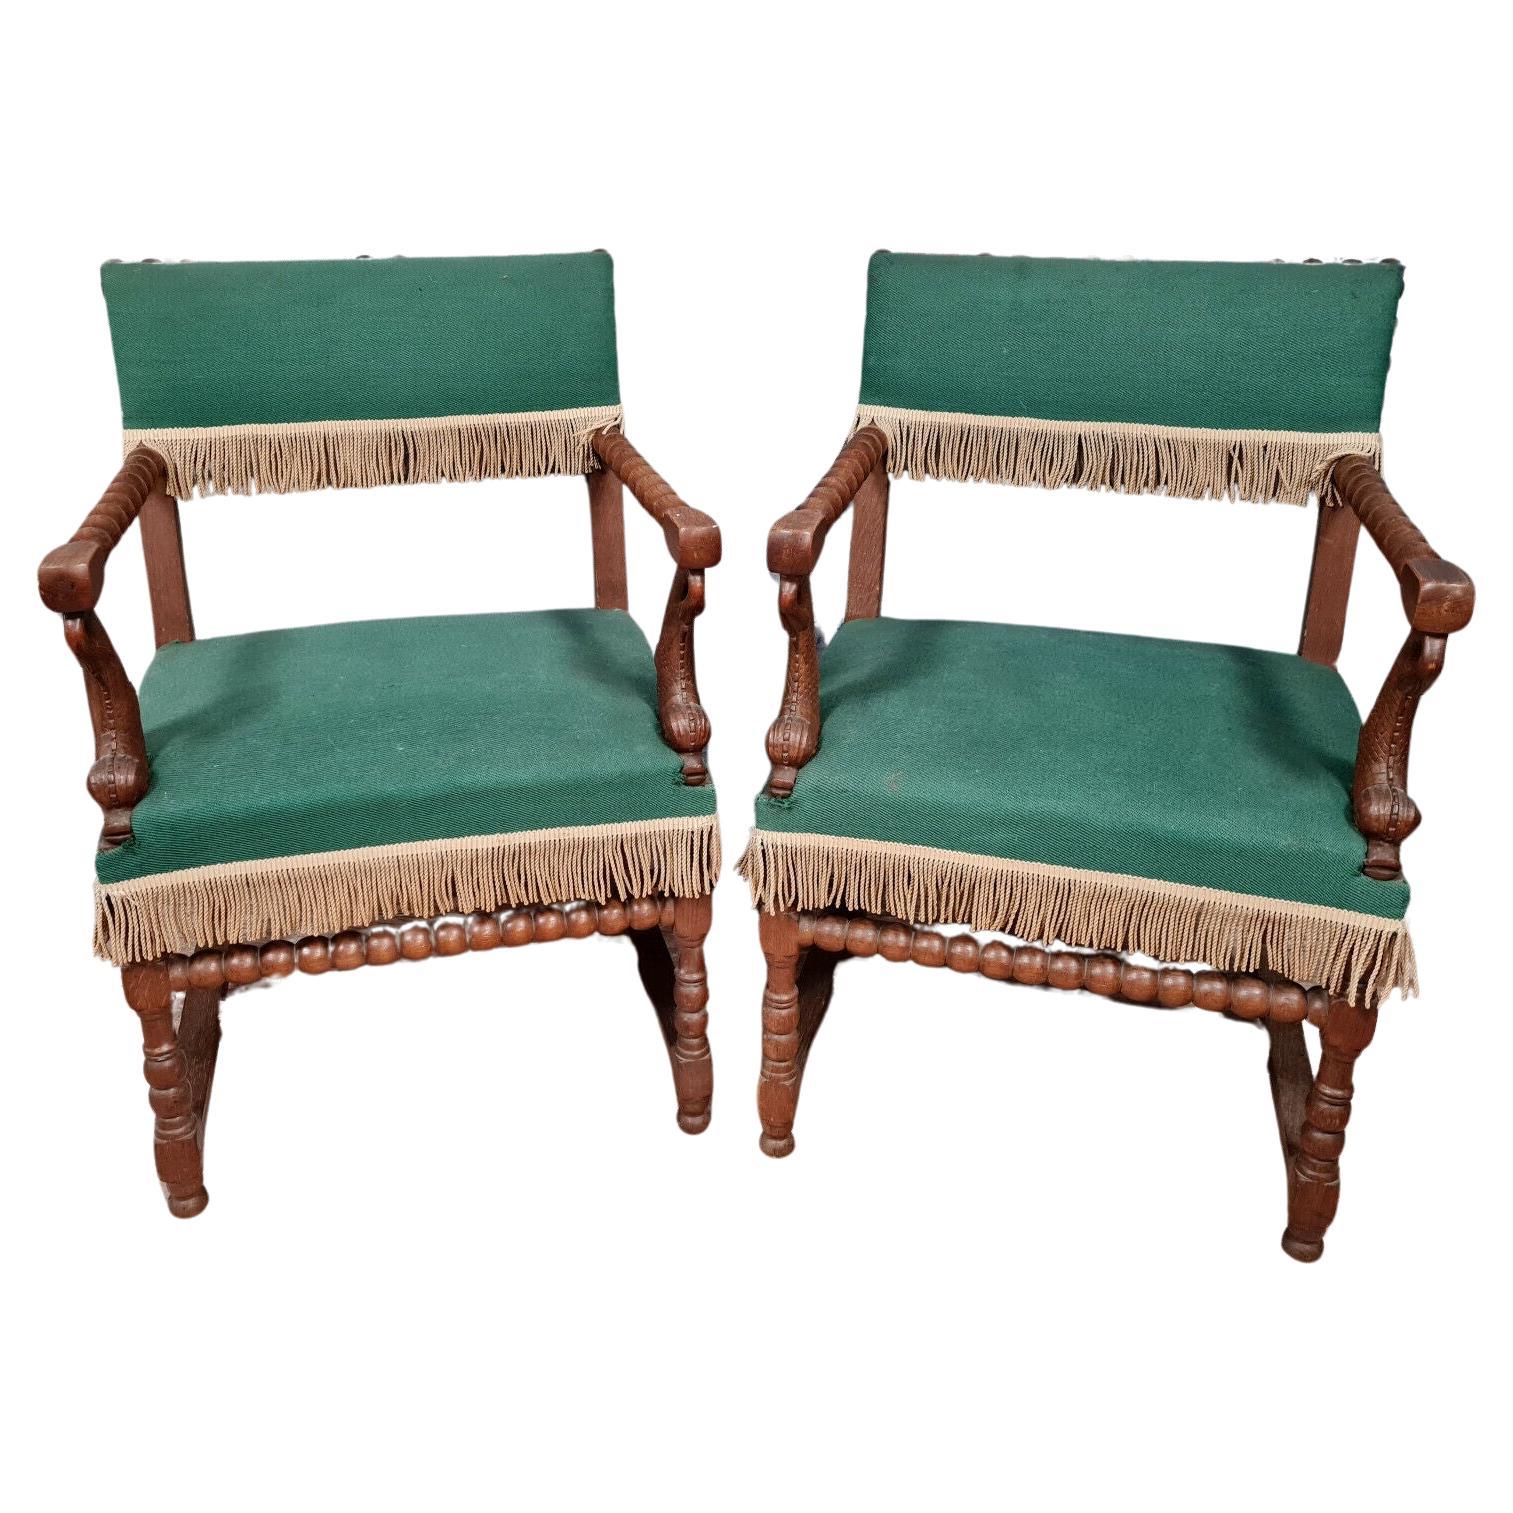 Exquisite Pair of Solid Oak Louis XIII Armchairs from circa 1850s -1X11